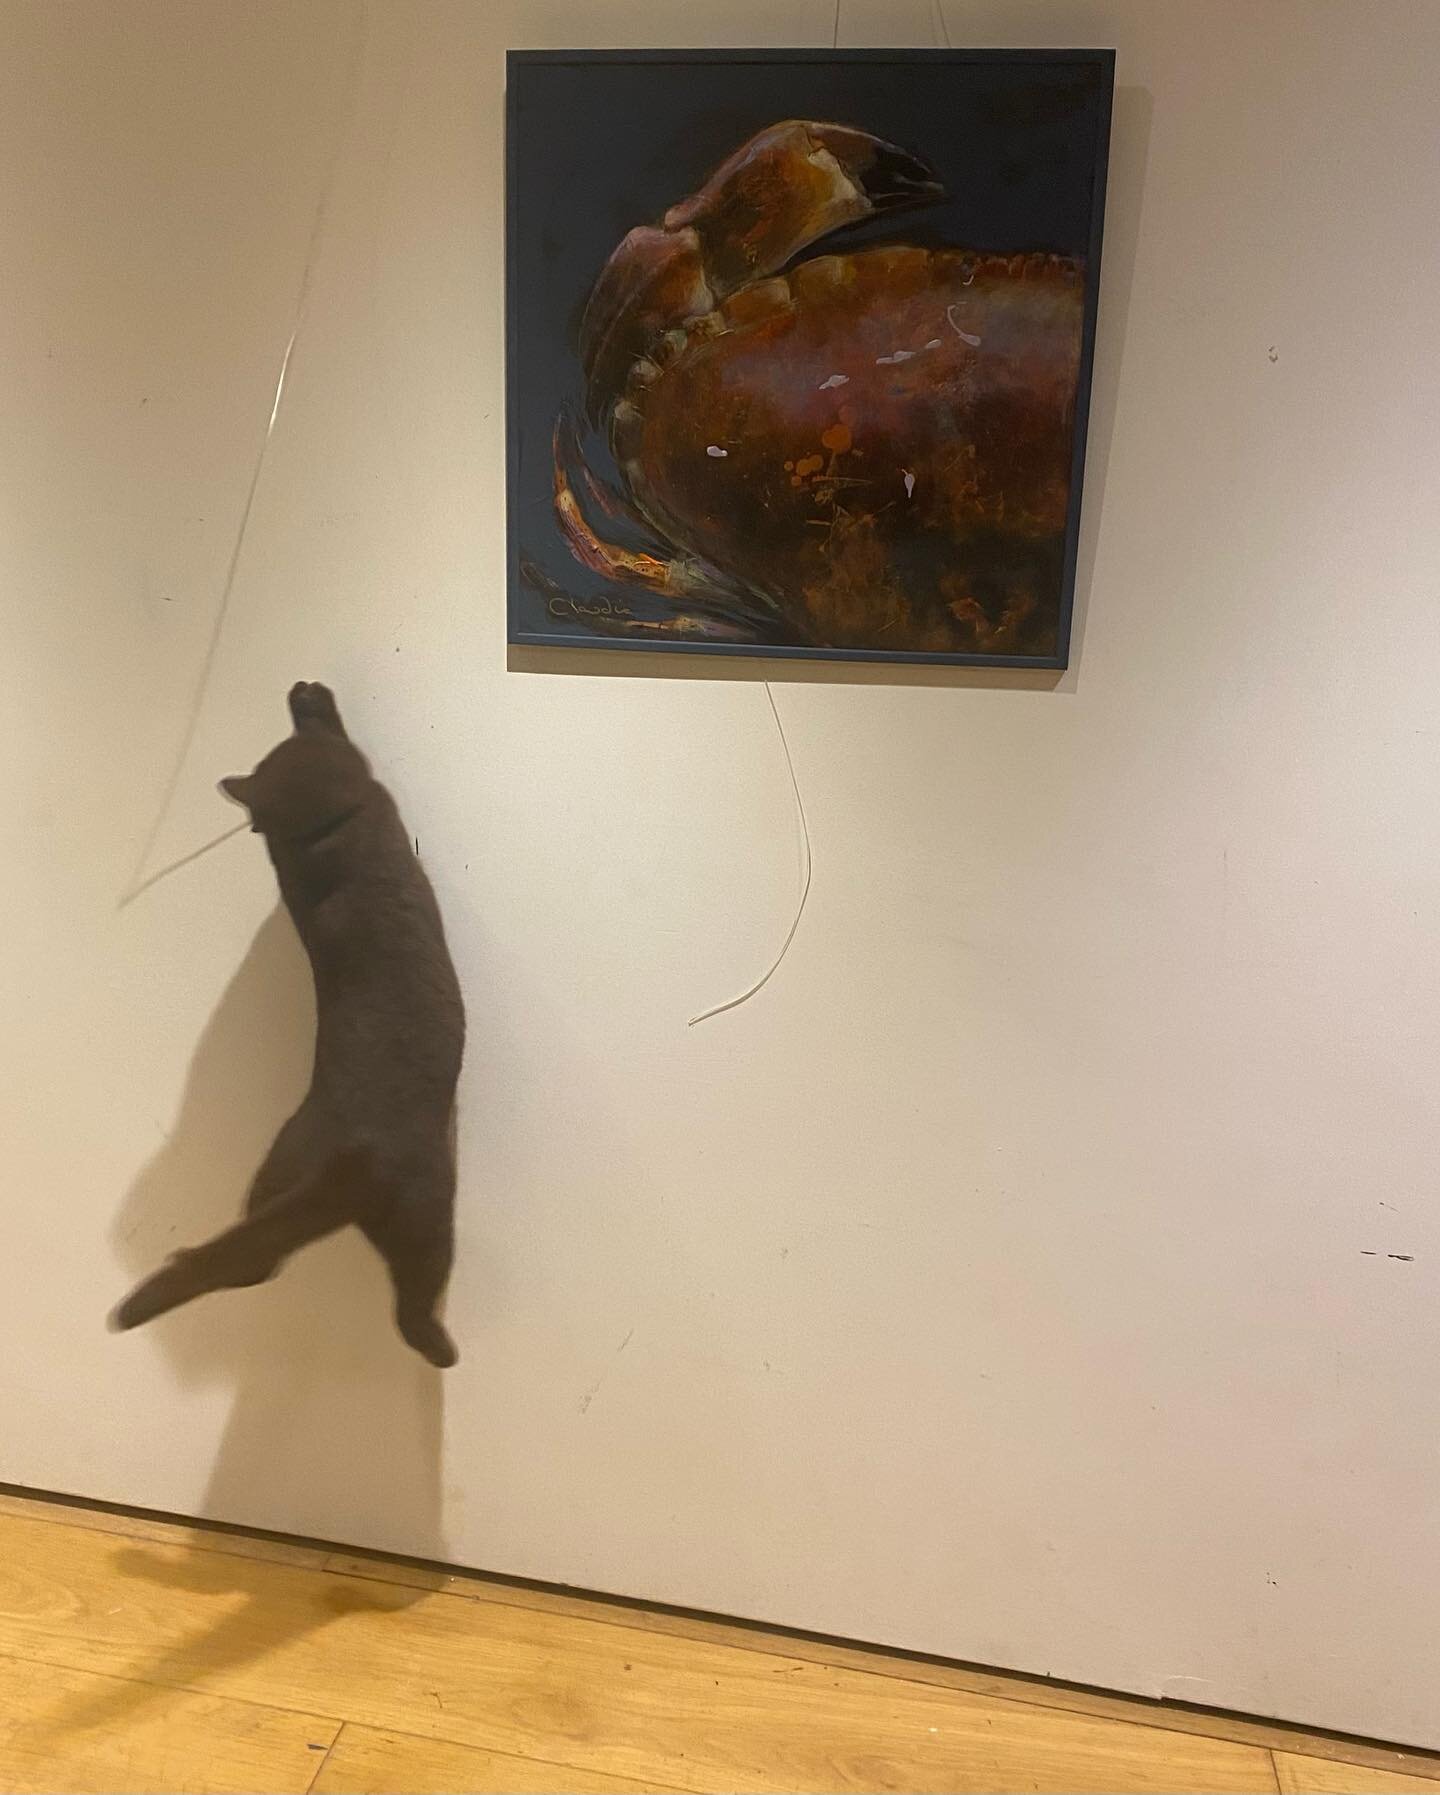 Admiring the artwork Bruno ???? Catching crabs &hellip;😂Gallery cat - One day I might even paint you 🐈&zwj;⬛ #crabsandcats #Cornishart #seafood #catandcrab